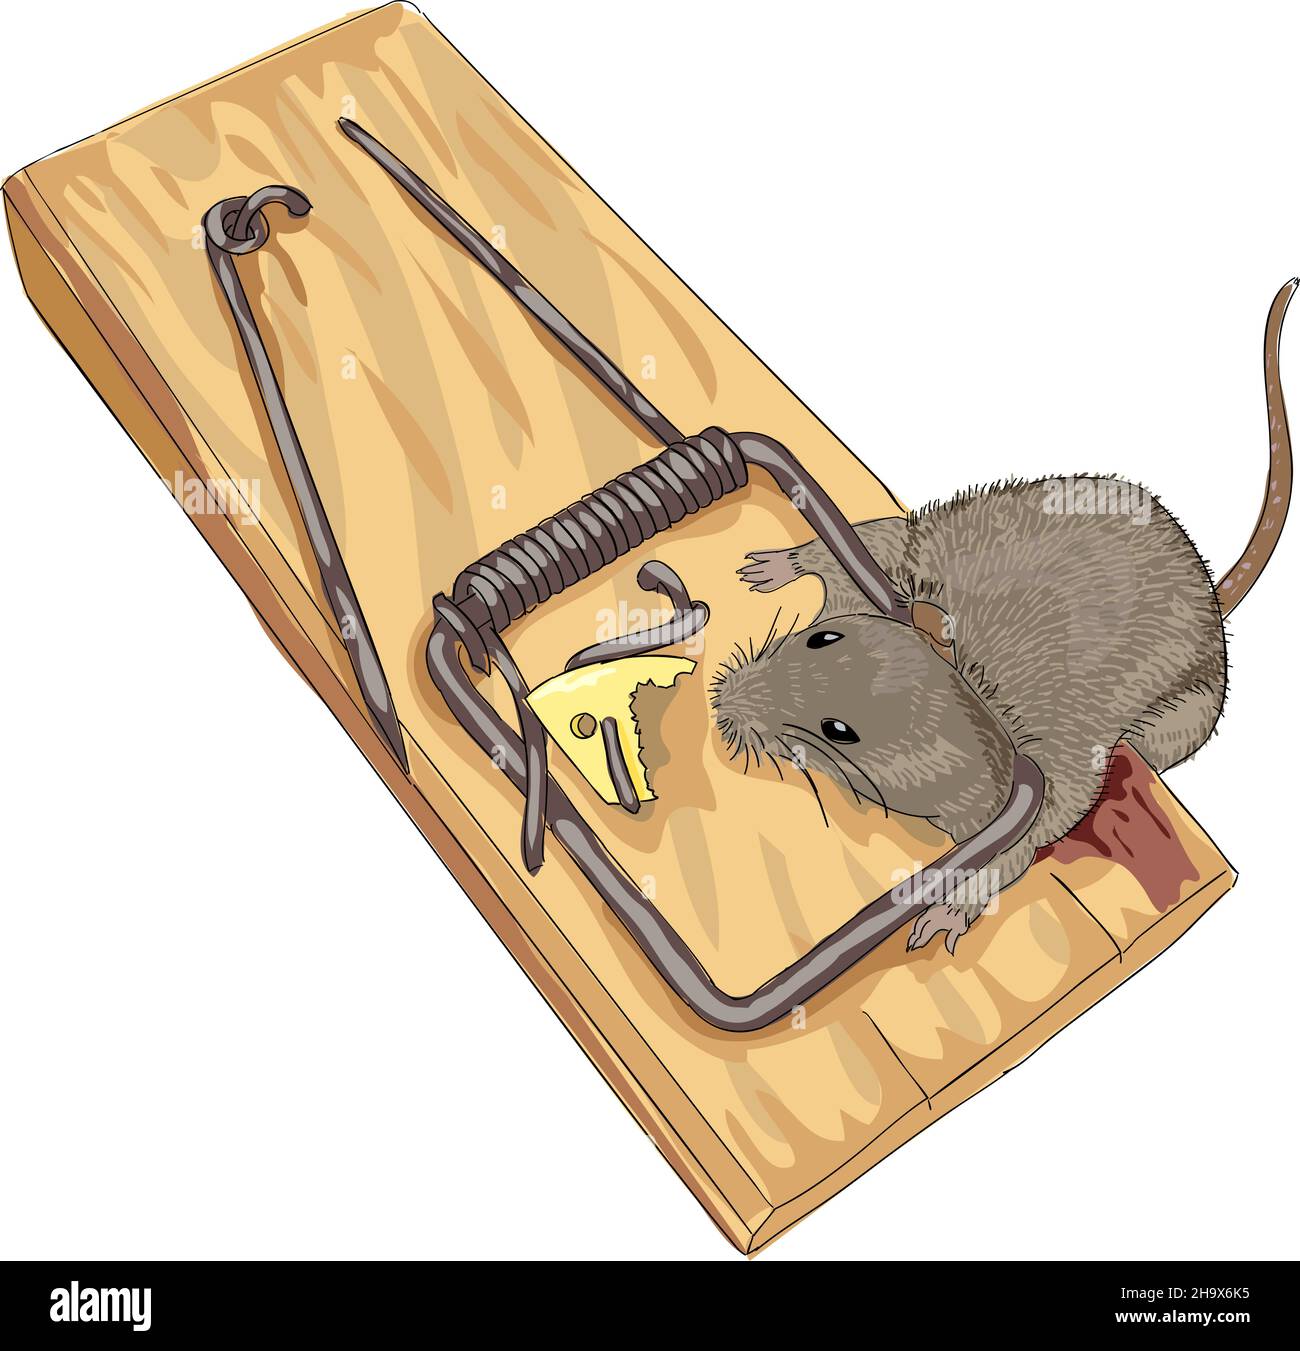 Mouse in a mousetrap. Vector illustration. Stock Vector